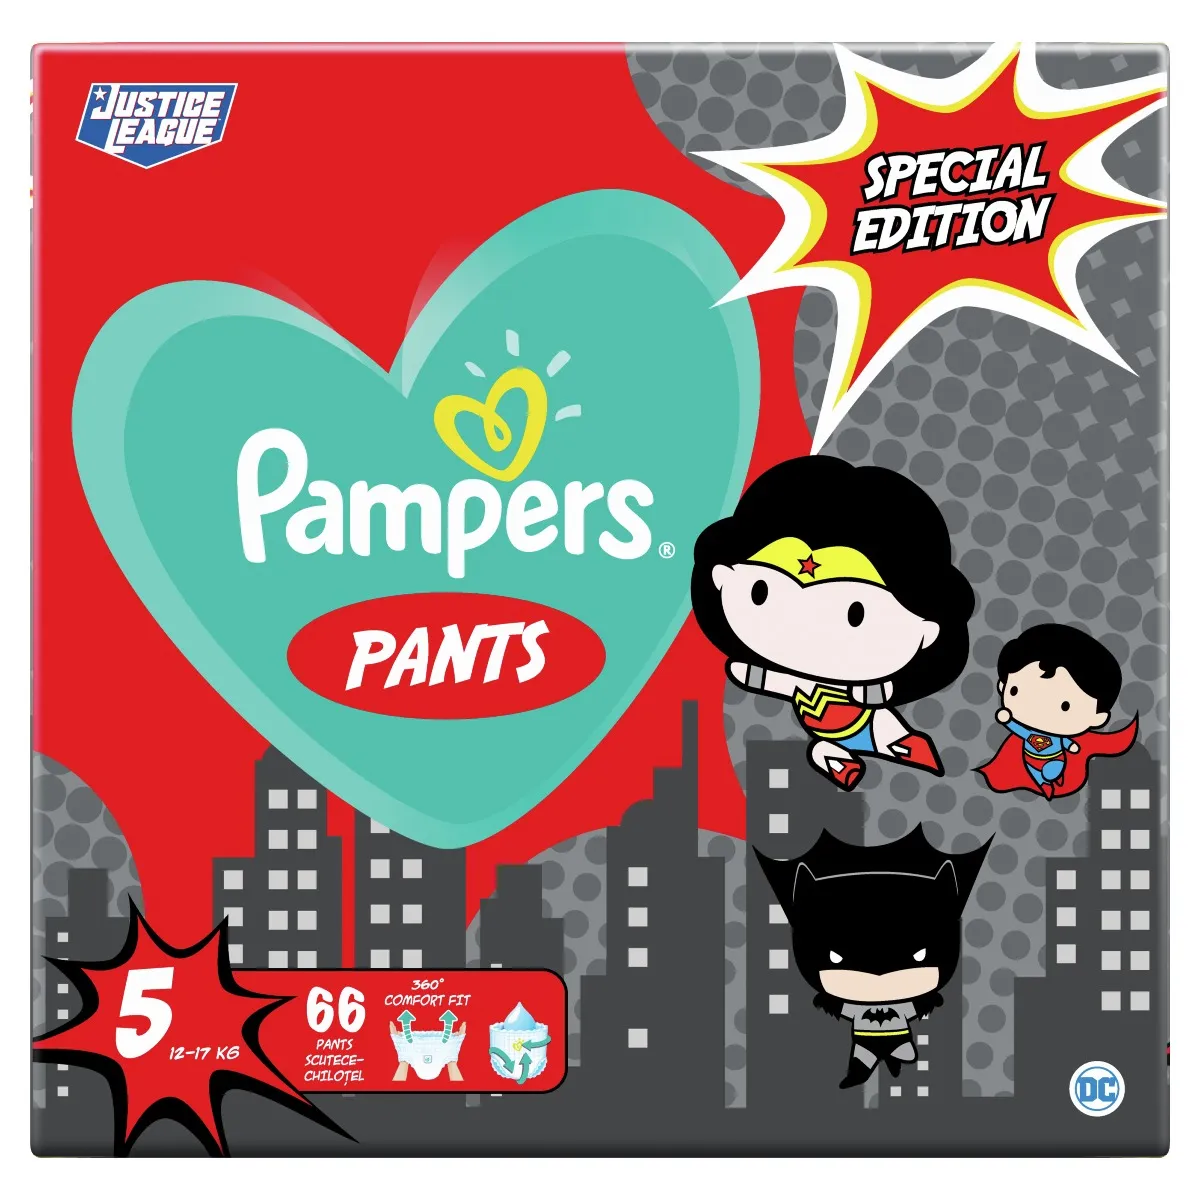 Pampers Pants vel. 5 Special Edition 12-17 kg